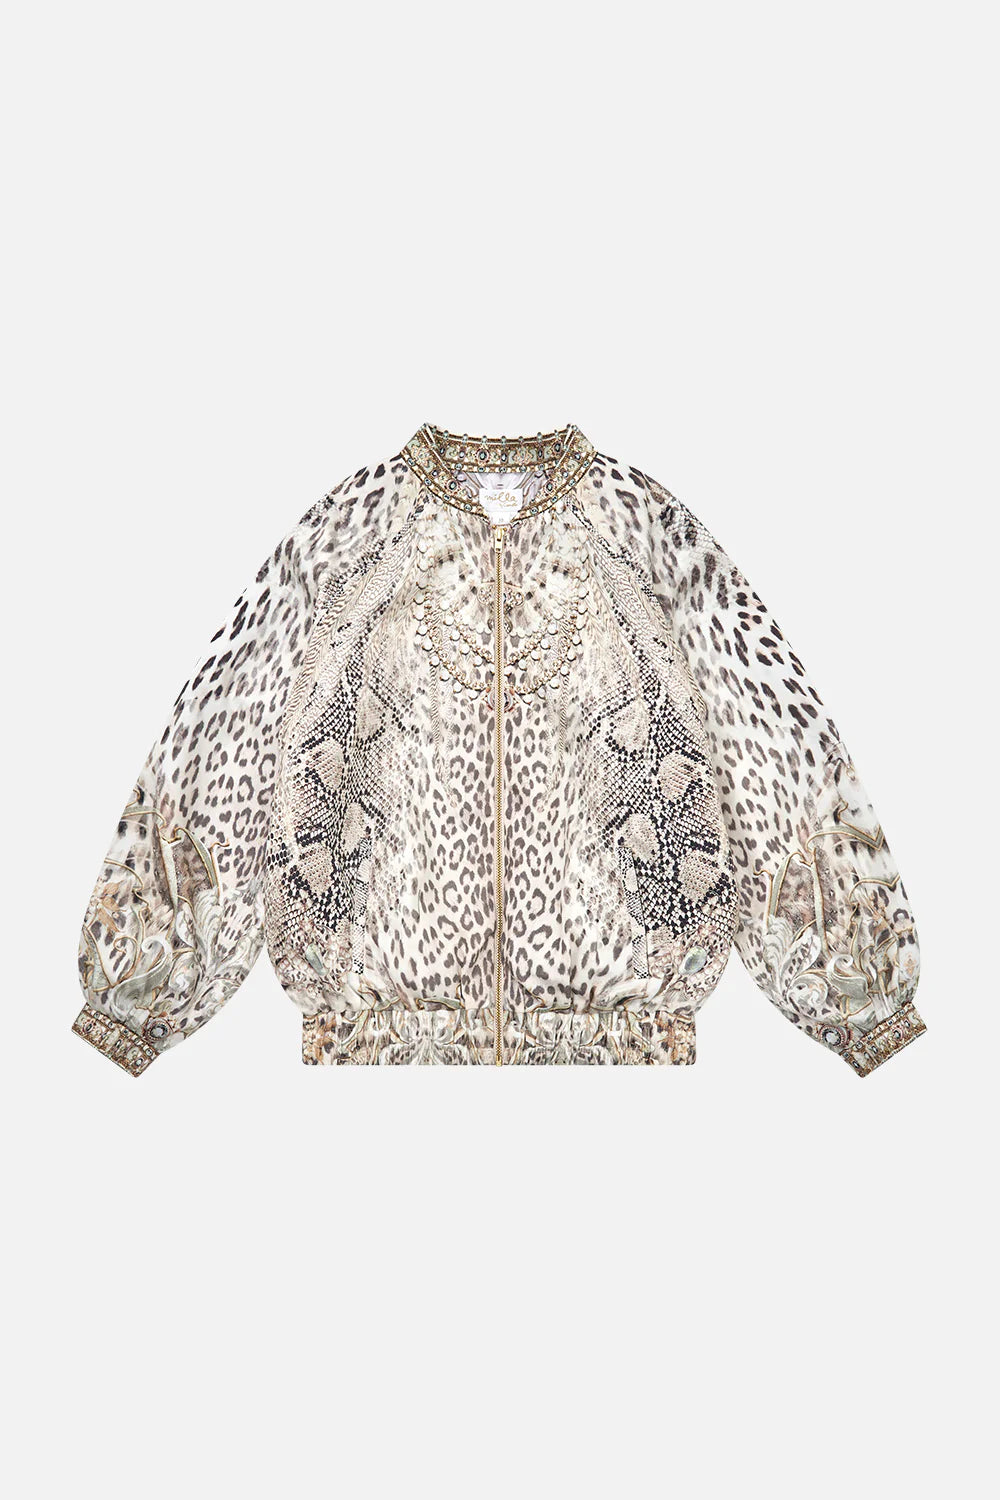 Camilla Looking Glass Houses Kids Bomber Jacket